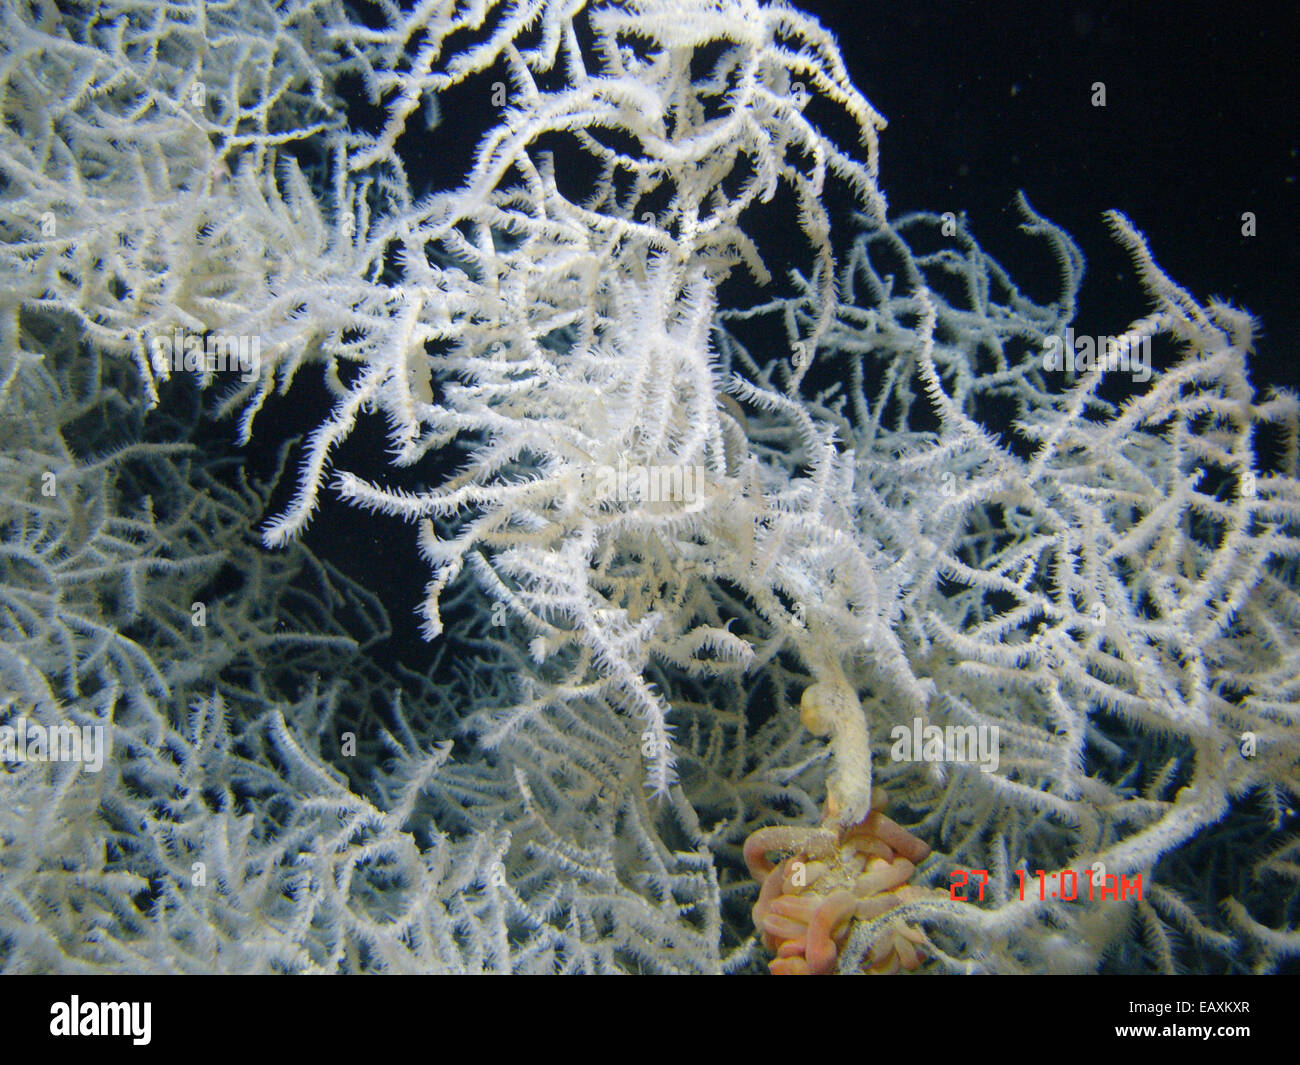 Deep sea coral. White 'black coral' Leiopathes glaberrima. Gooseneck barnacles are attached to a branch in the lower right center. Stock Photo